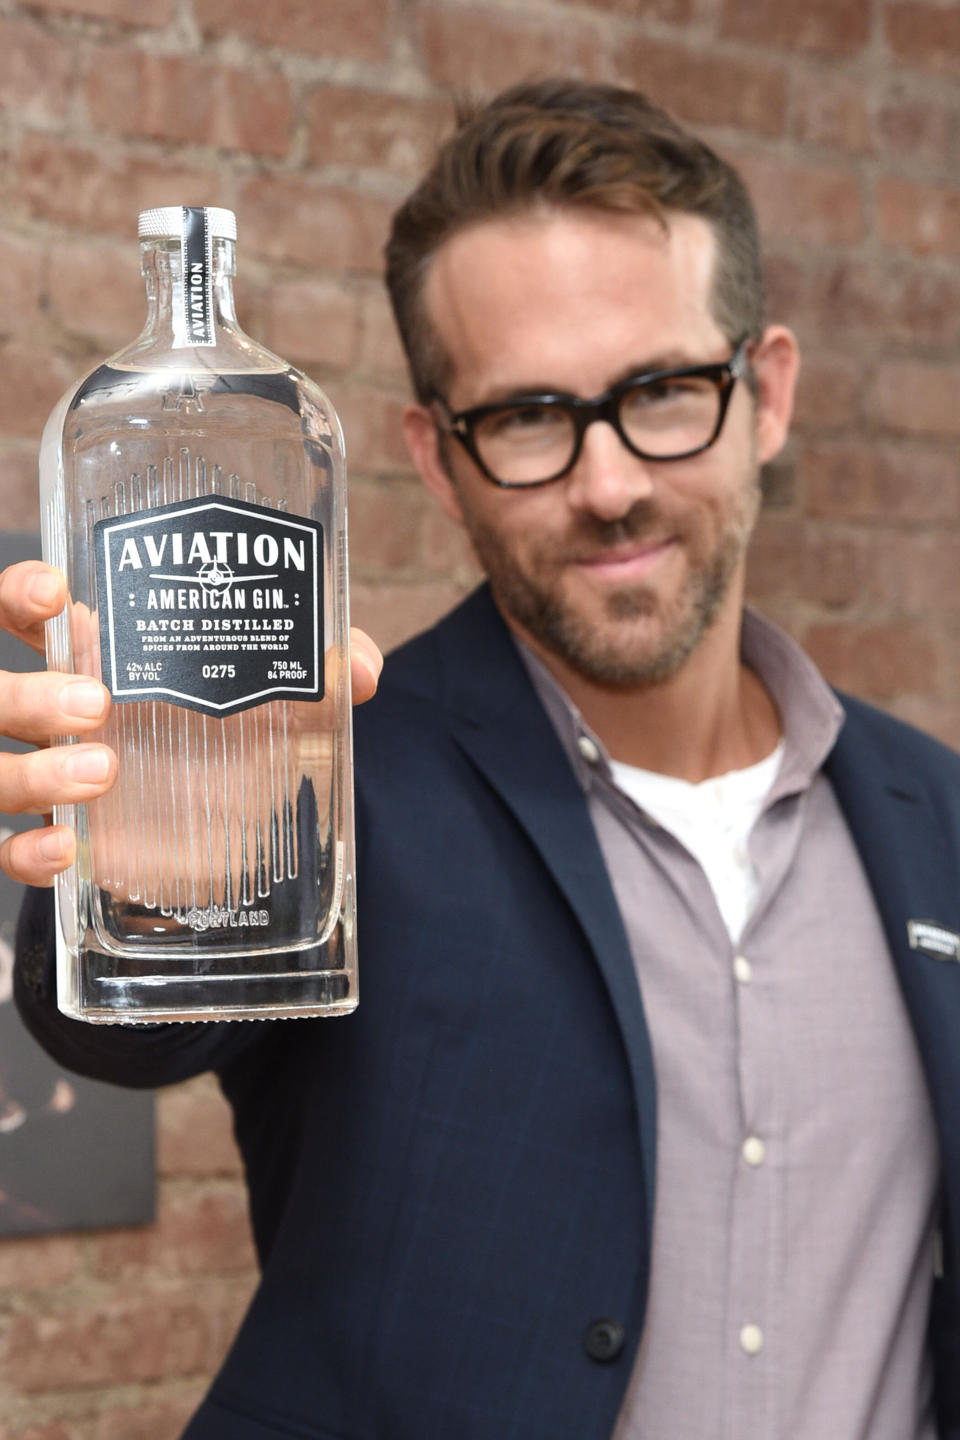 Give Ryan Reynolds props for the slightly embarrassed look on his face as he holds up this bottle of <a href="http://www.aviationgin.com/" target="_blank" rel="noopener noreferrer">Aviation Gin</a>. It's as if he's saying, "Look! I'm holding what might be called a 'noun,' a word used to describe a person, place or thing."